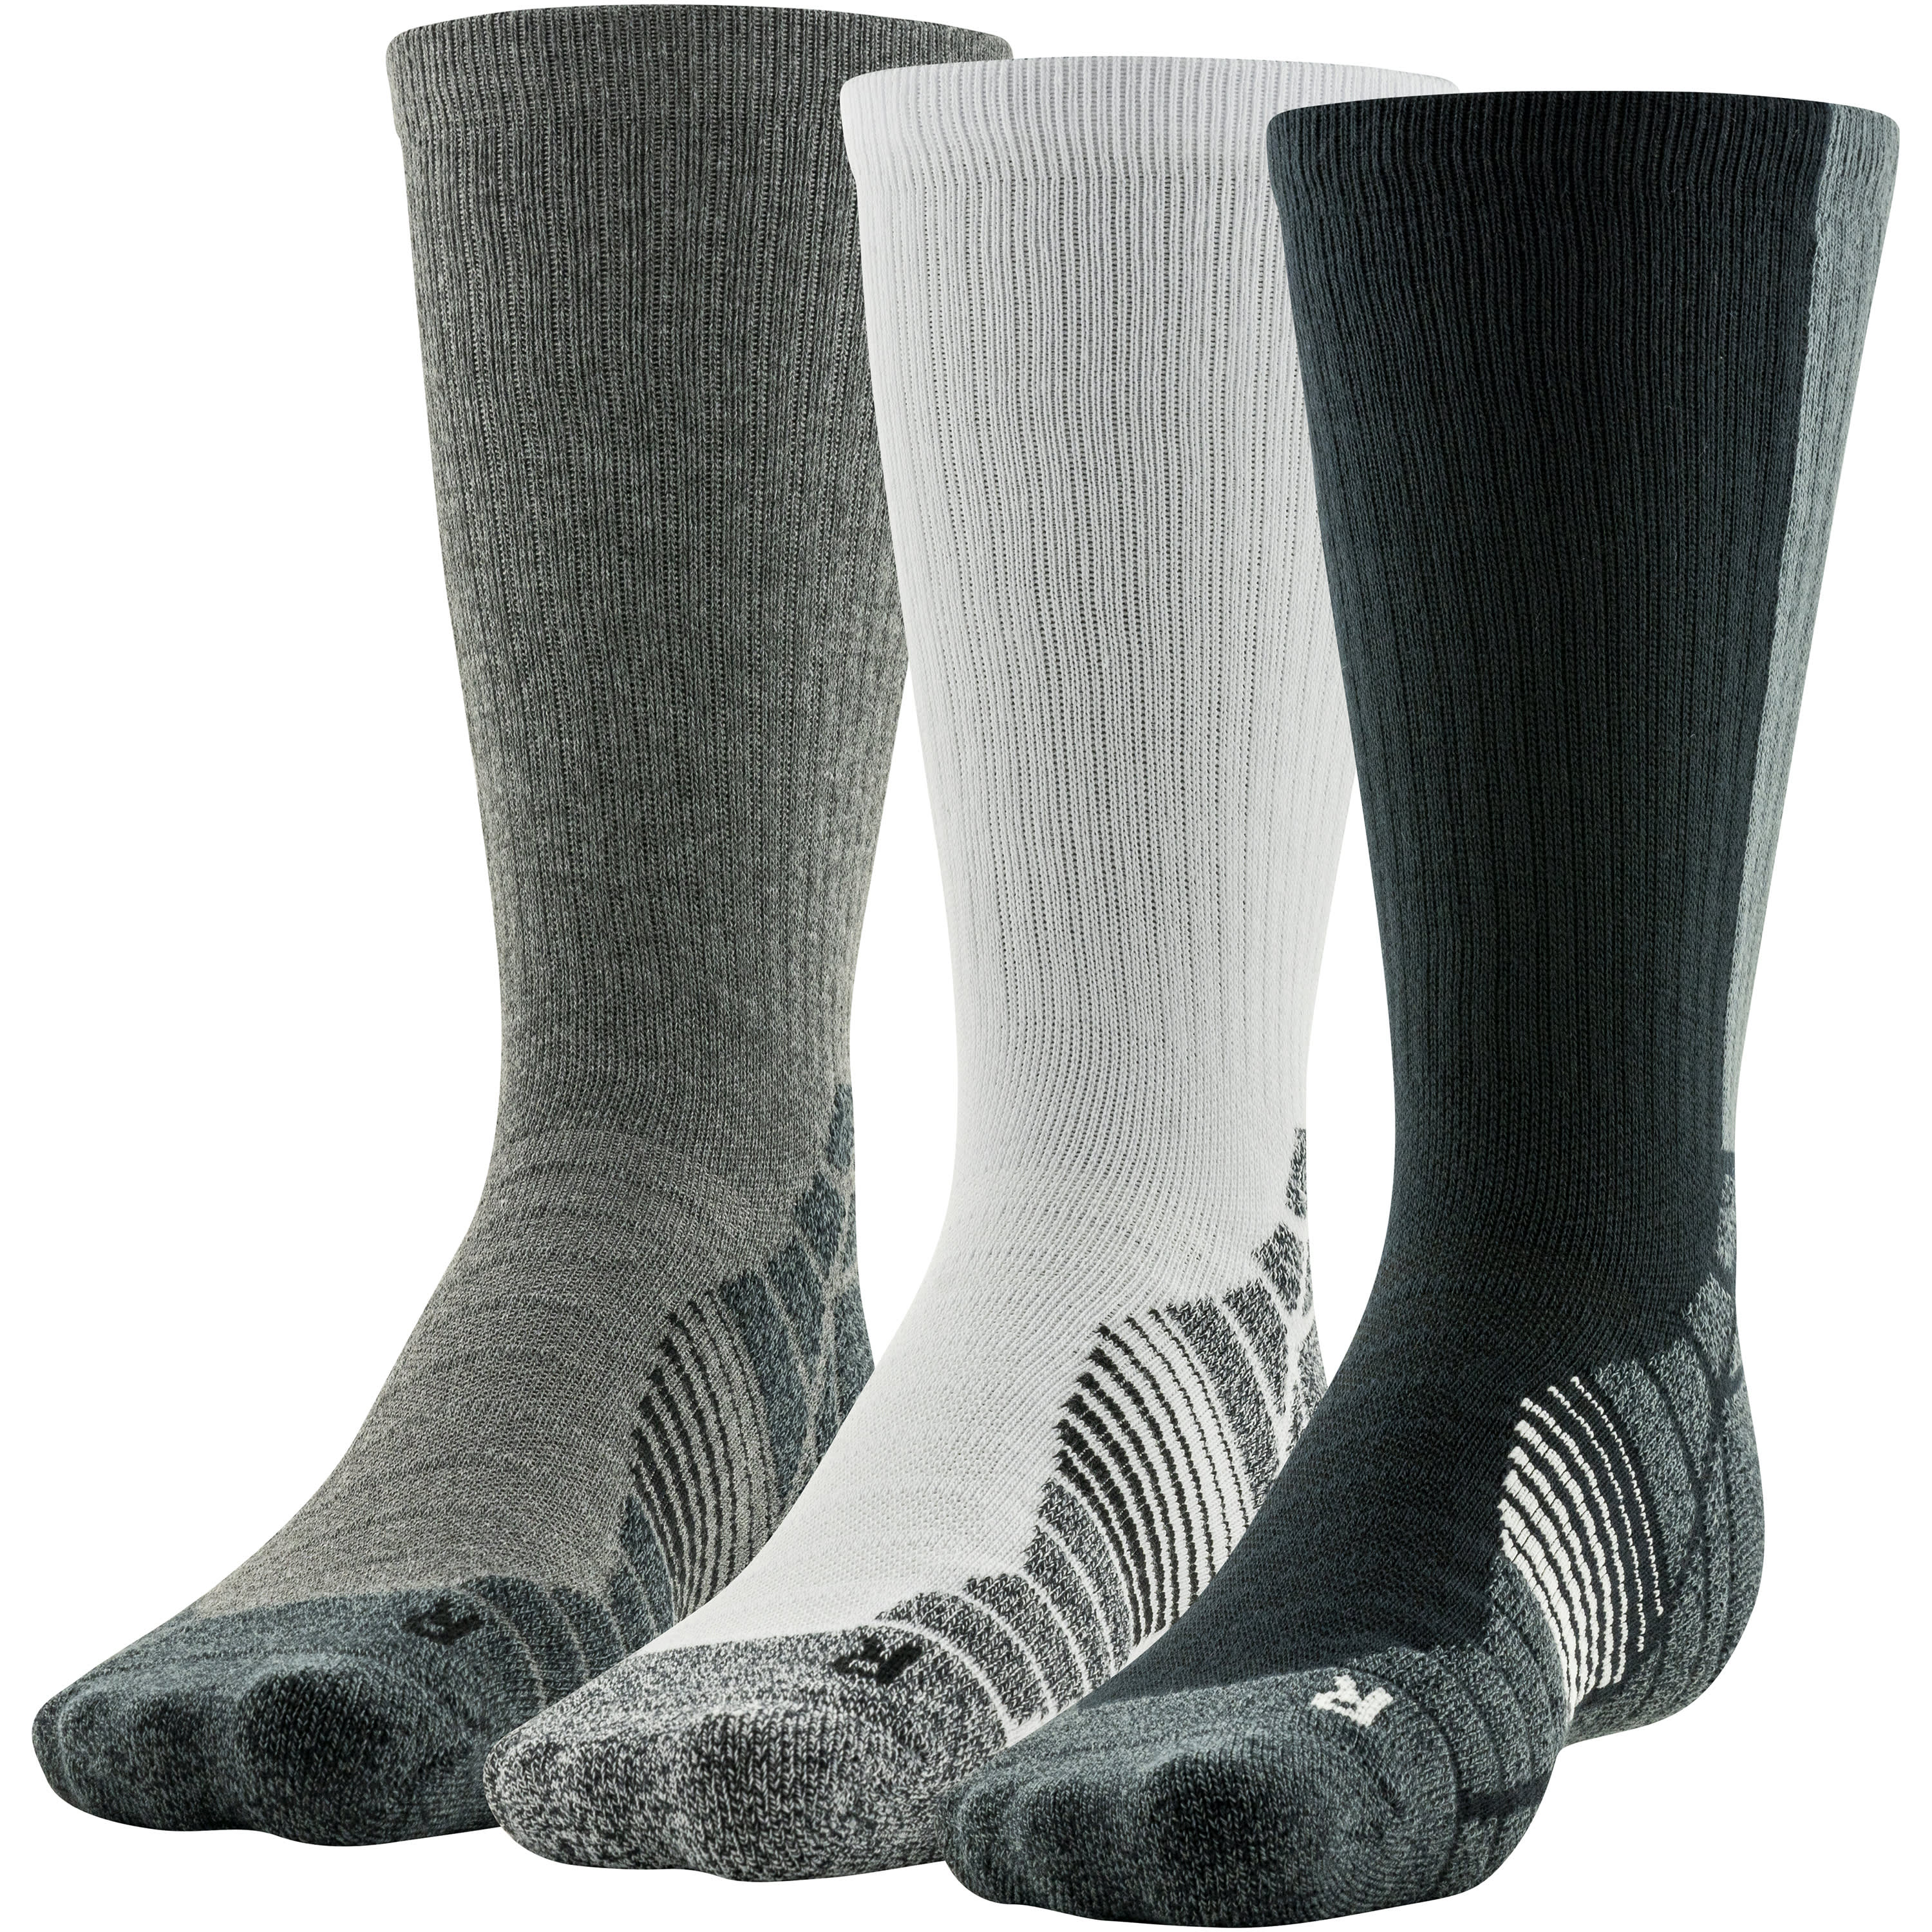 Under Armour® Men's Elevated Novelty Crew Socks – 3-Pack